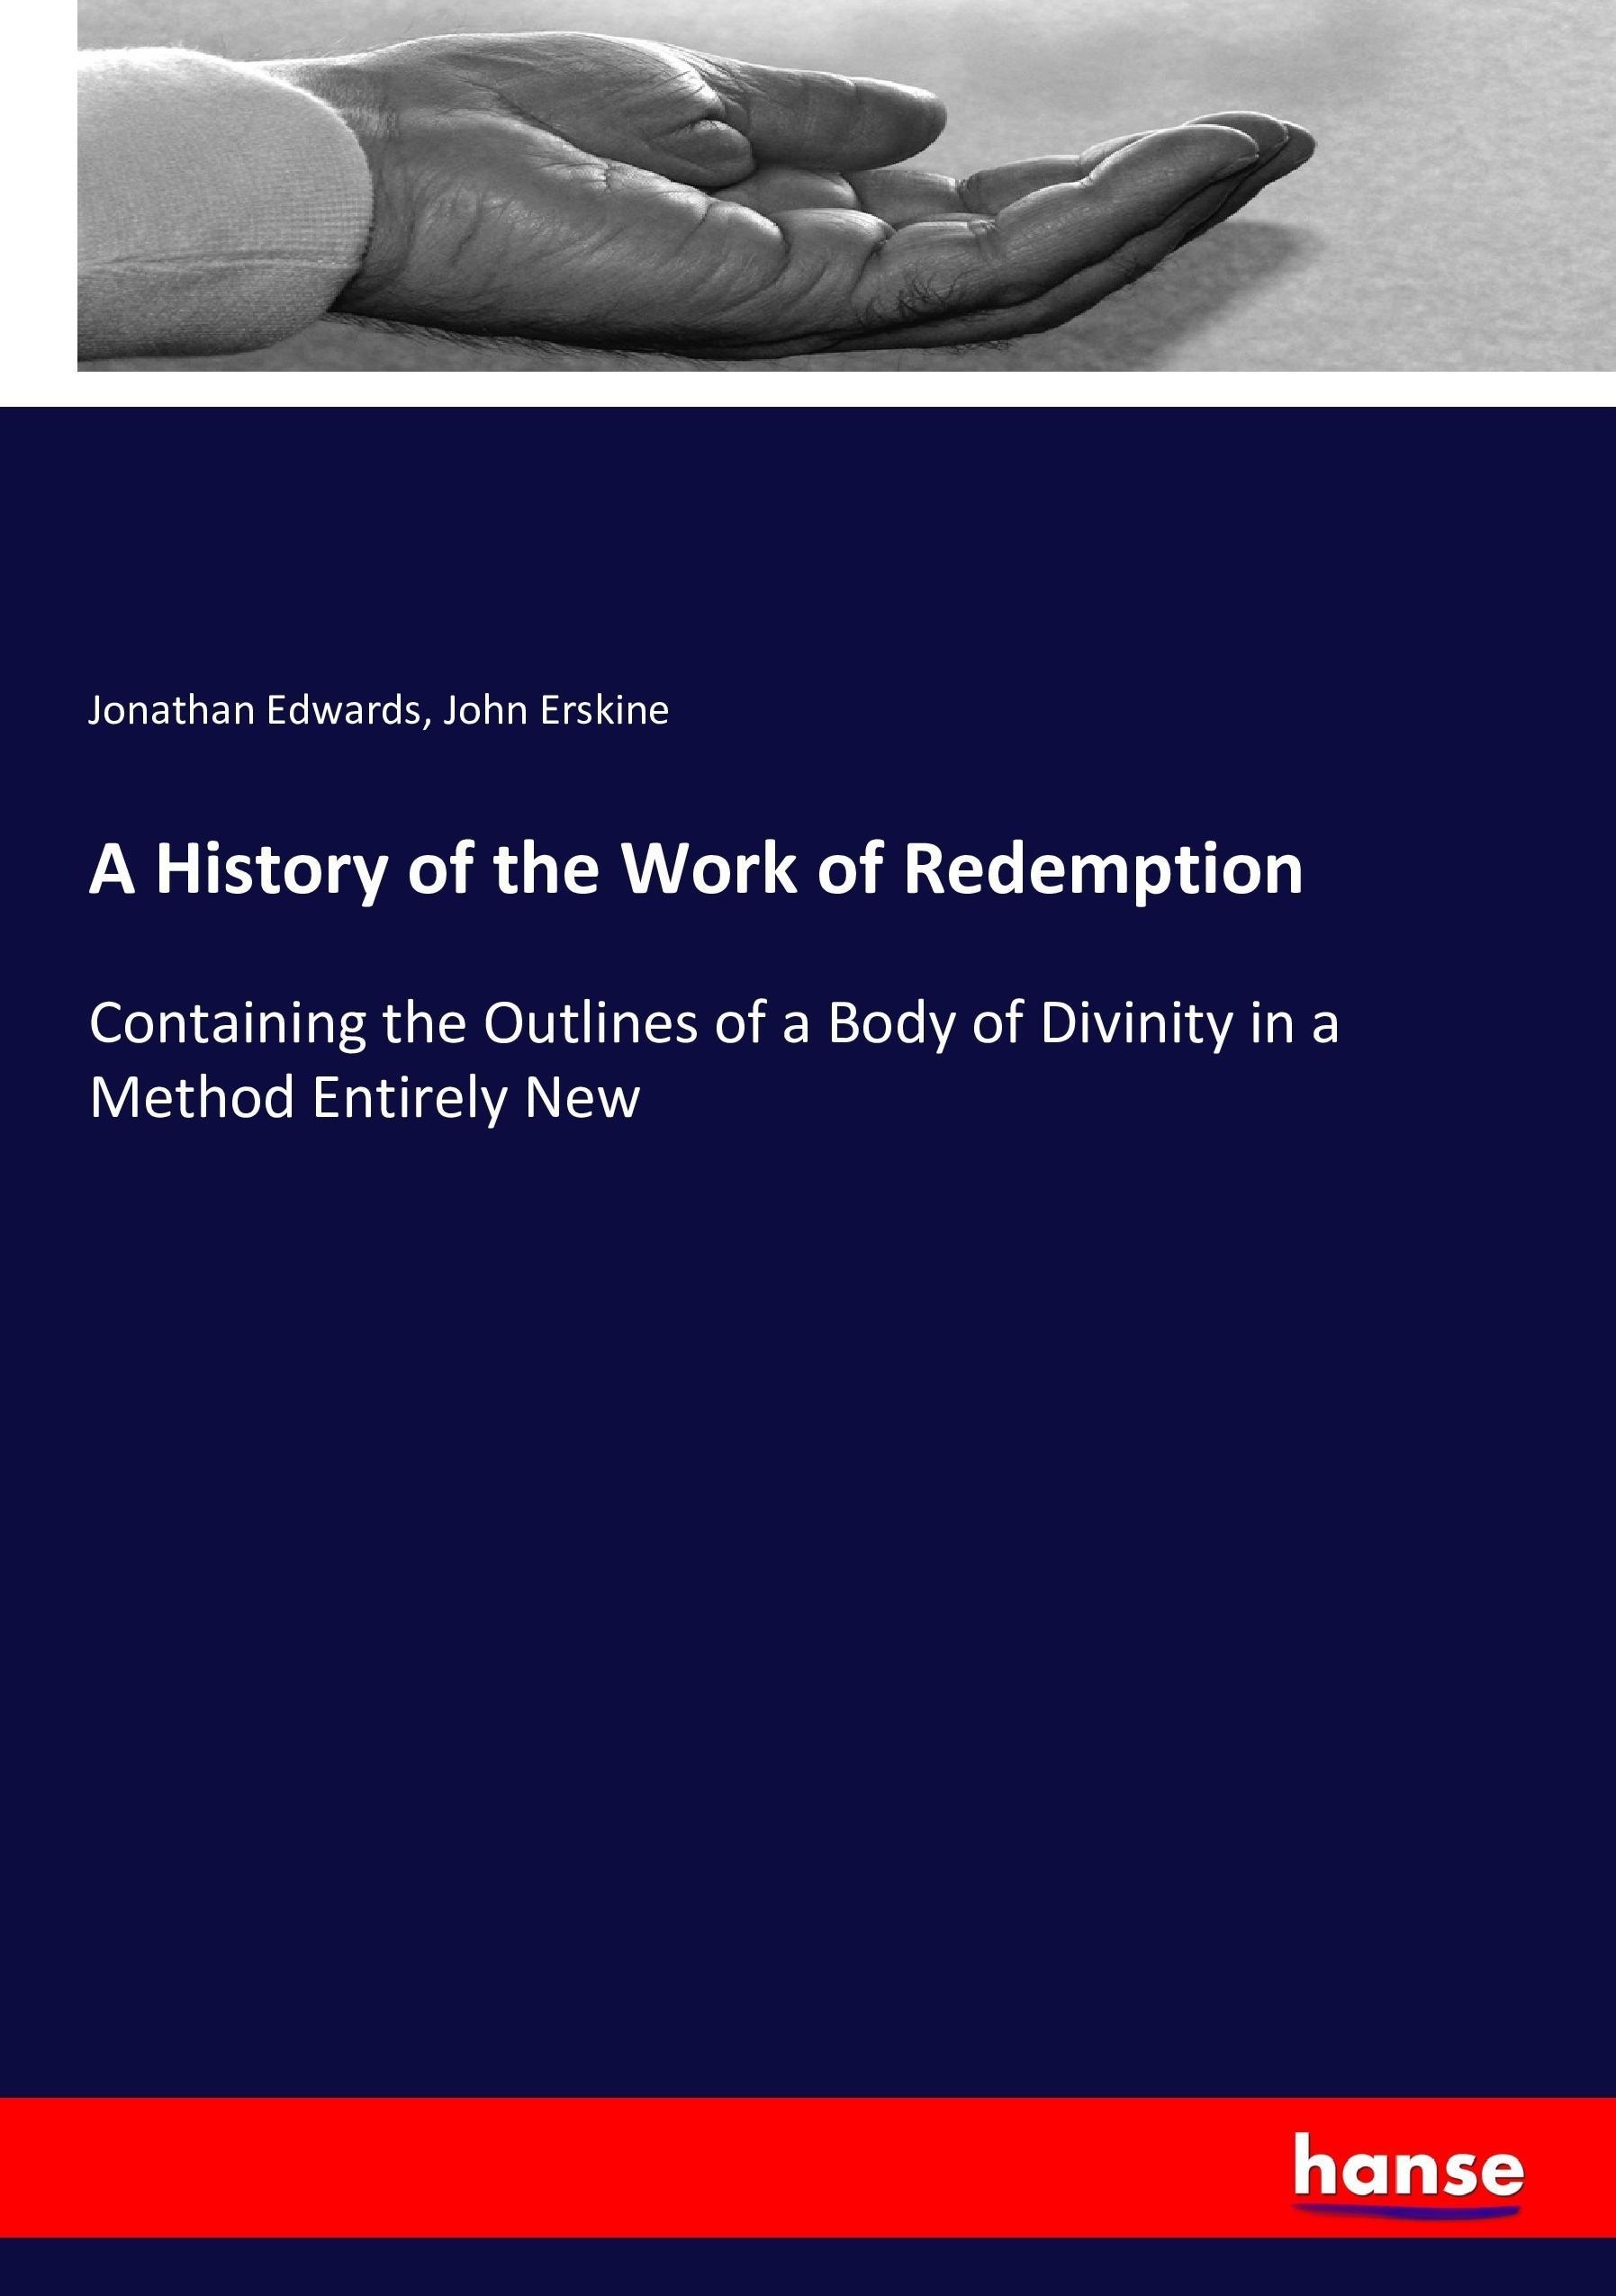 A History of the Work of Redemption - Edwards, Jonathan Erskine, John